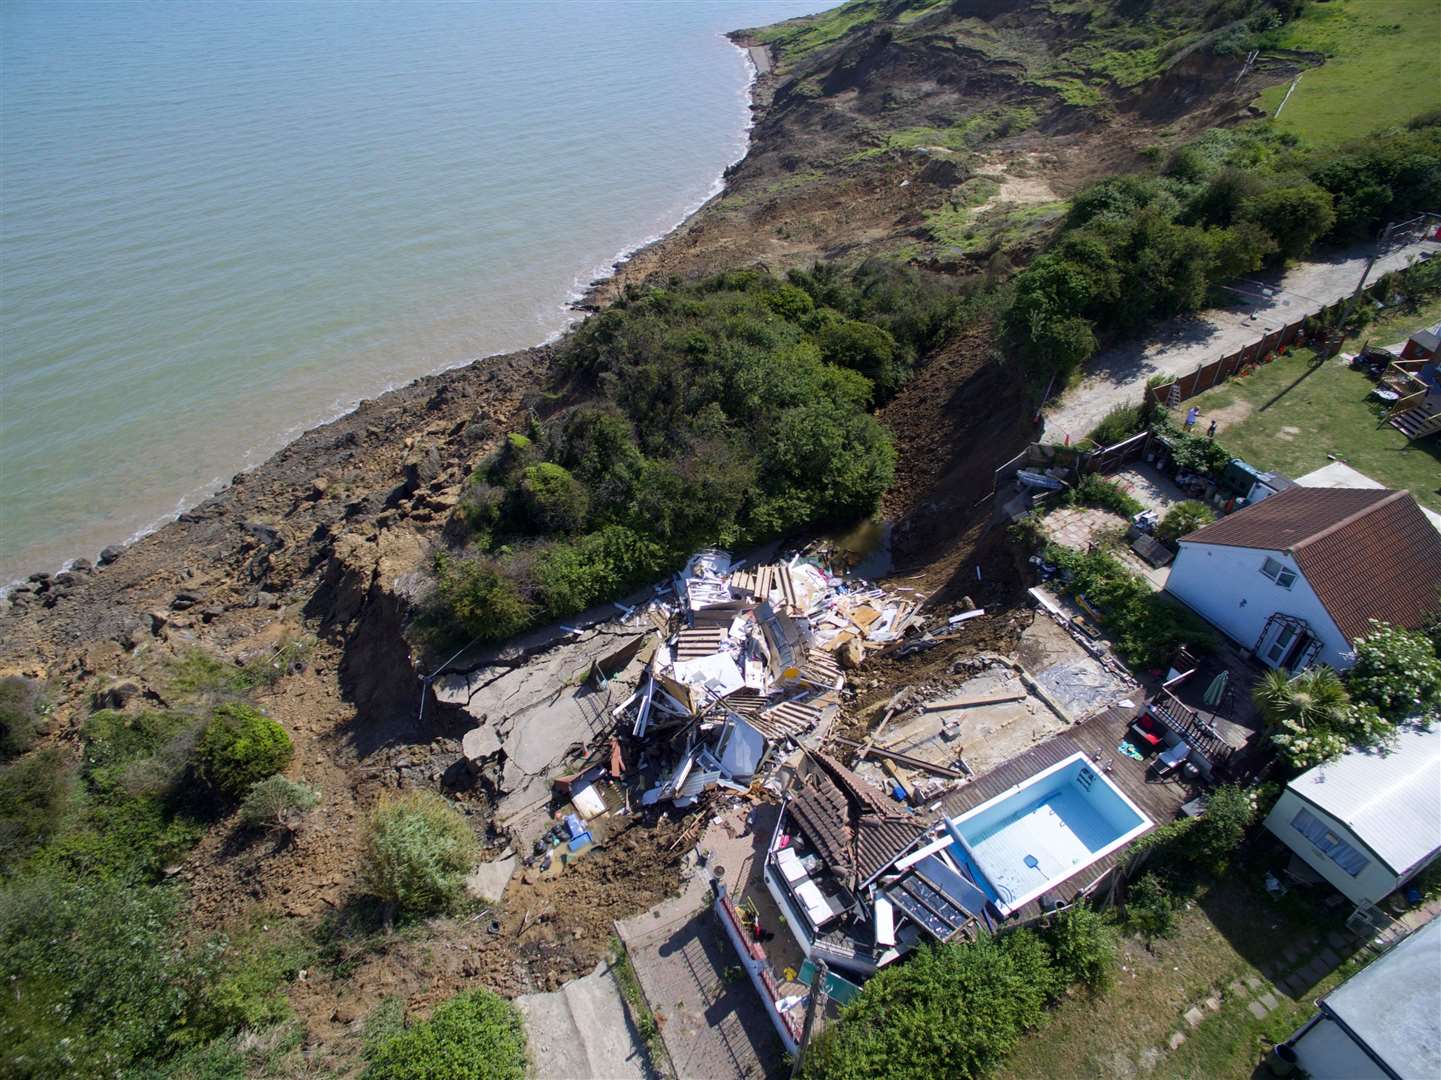 The house in Surf Crescent, Eastchurch, has fallen off the cliff. Picture: RLH Media